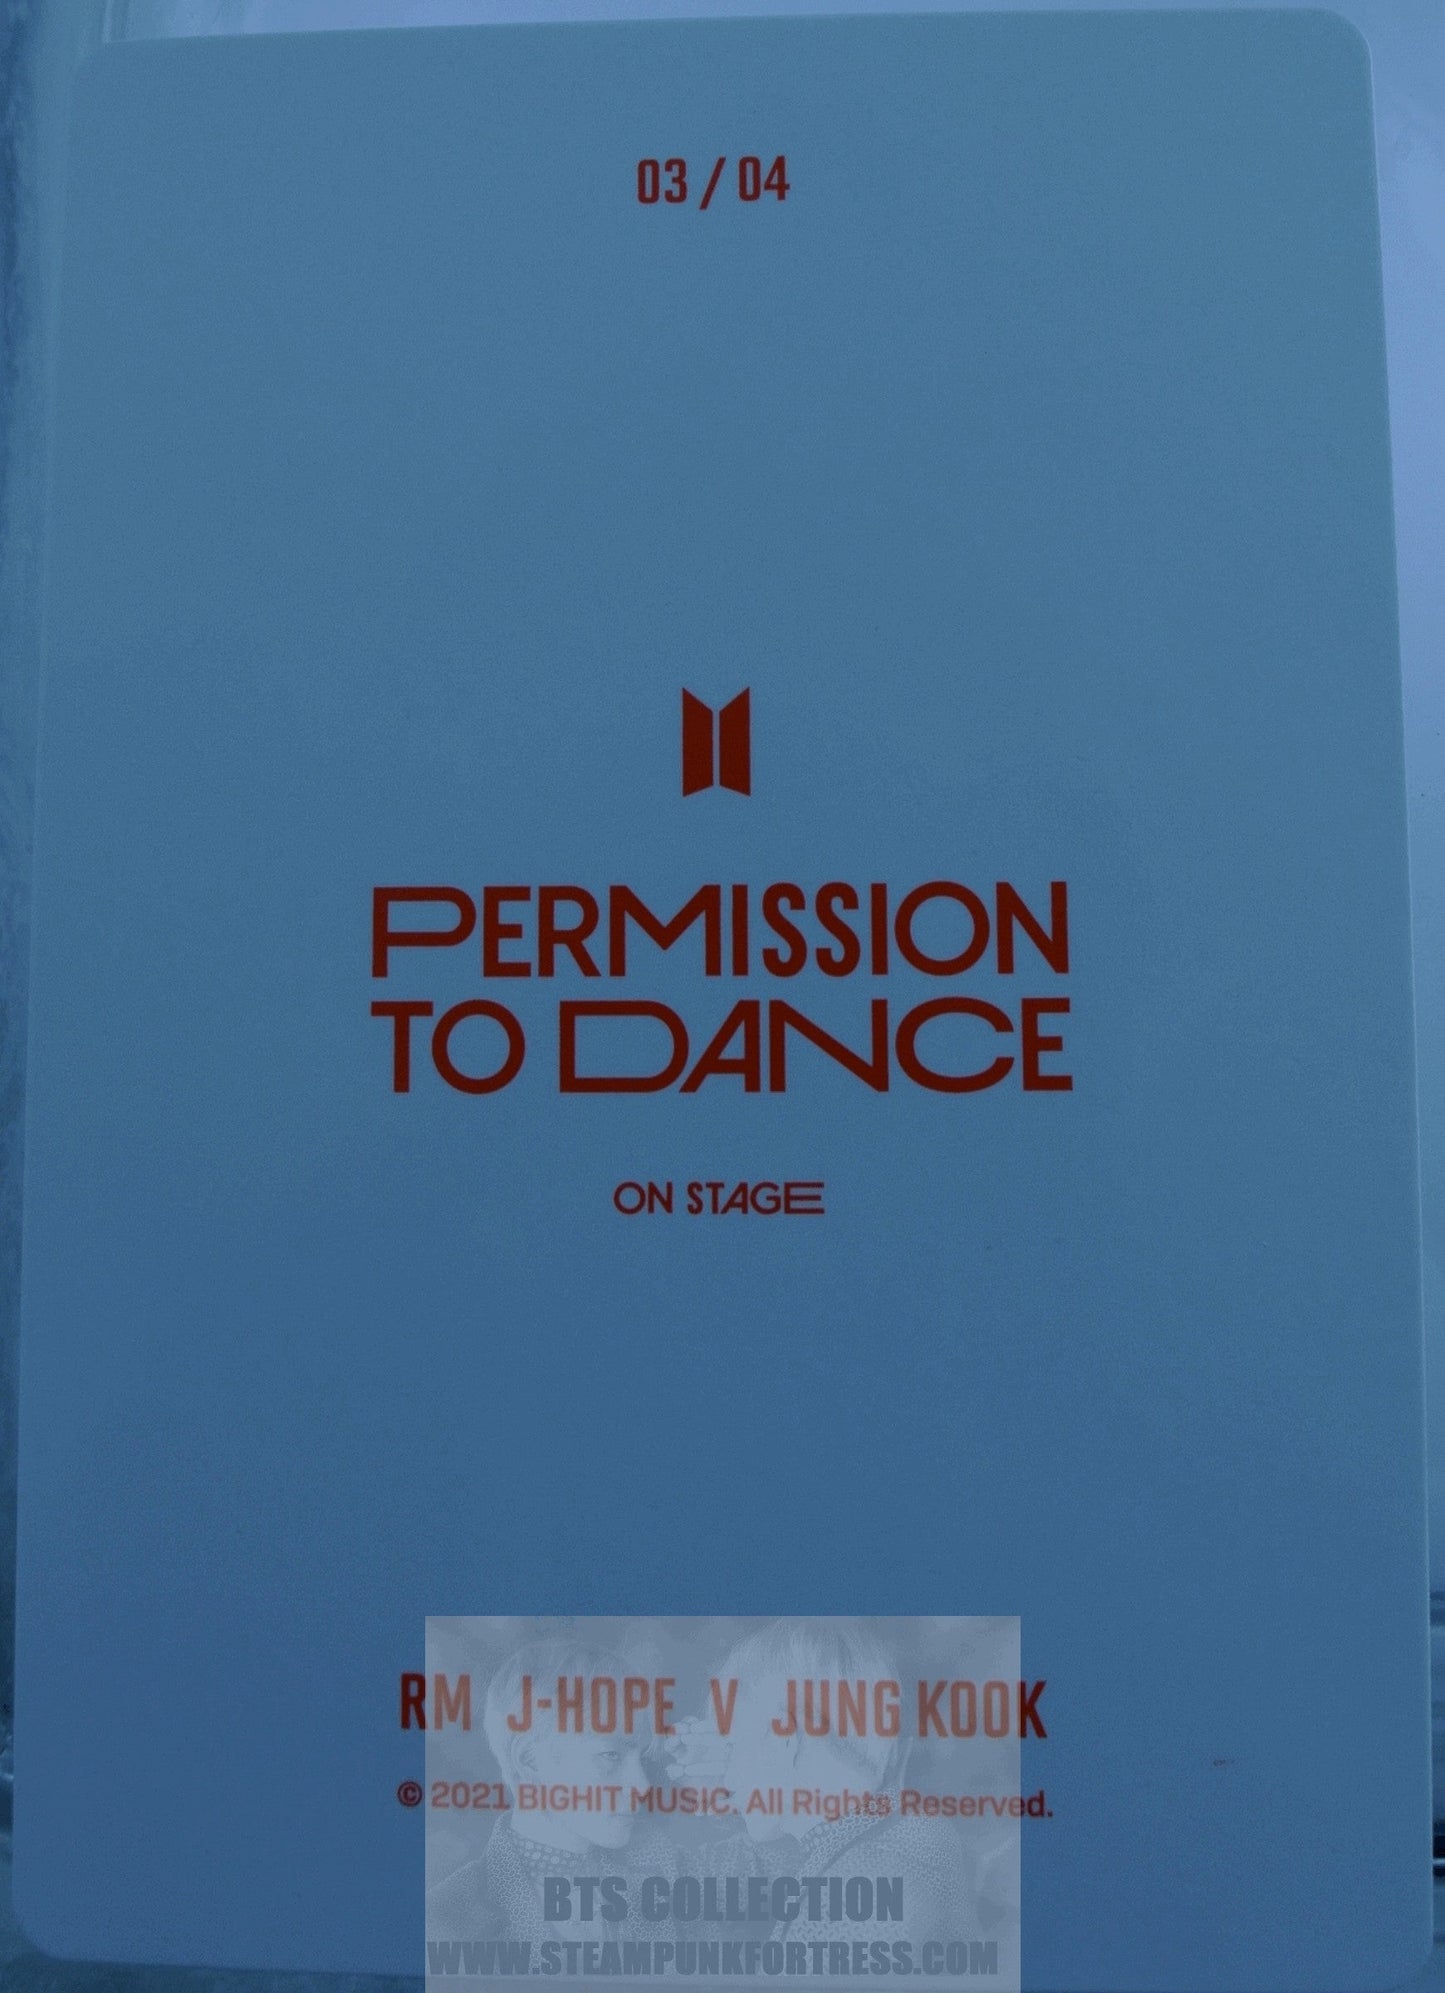 BTS PERMISSION TO DANCE ON STAGE PTD JUNGKOOK JEON V KIM TAEHYUNG JHOPE JUNG HOSEOK RM KIM NAMJOON 2021 PHOTOCARD PHOTO CARD #3 OF 4 NEW OFFICIAL MERCHANDISE